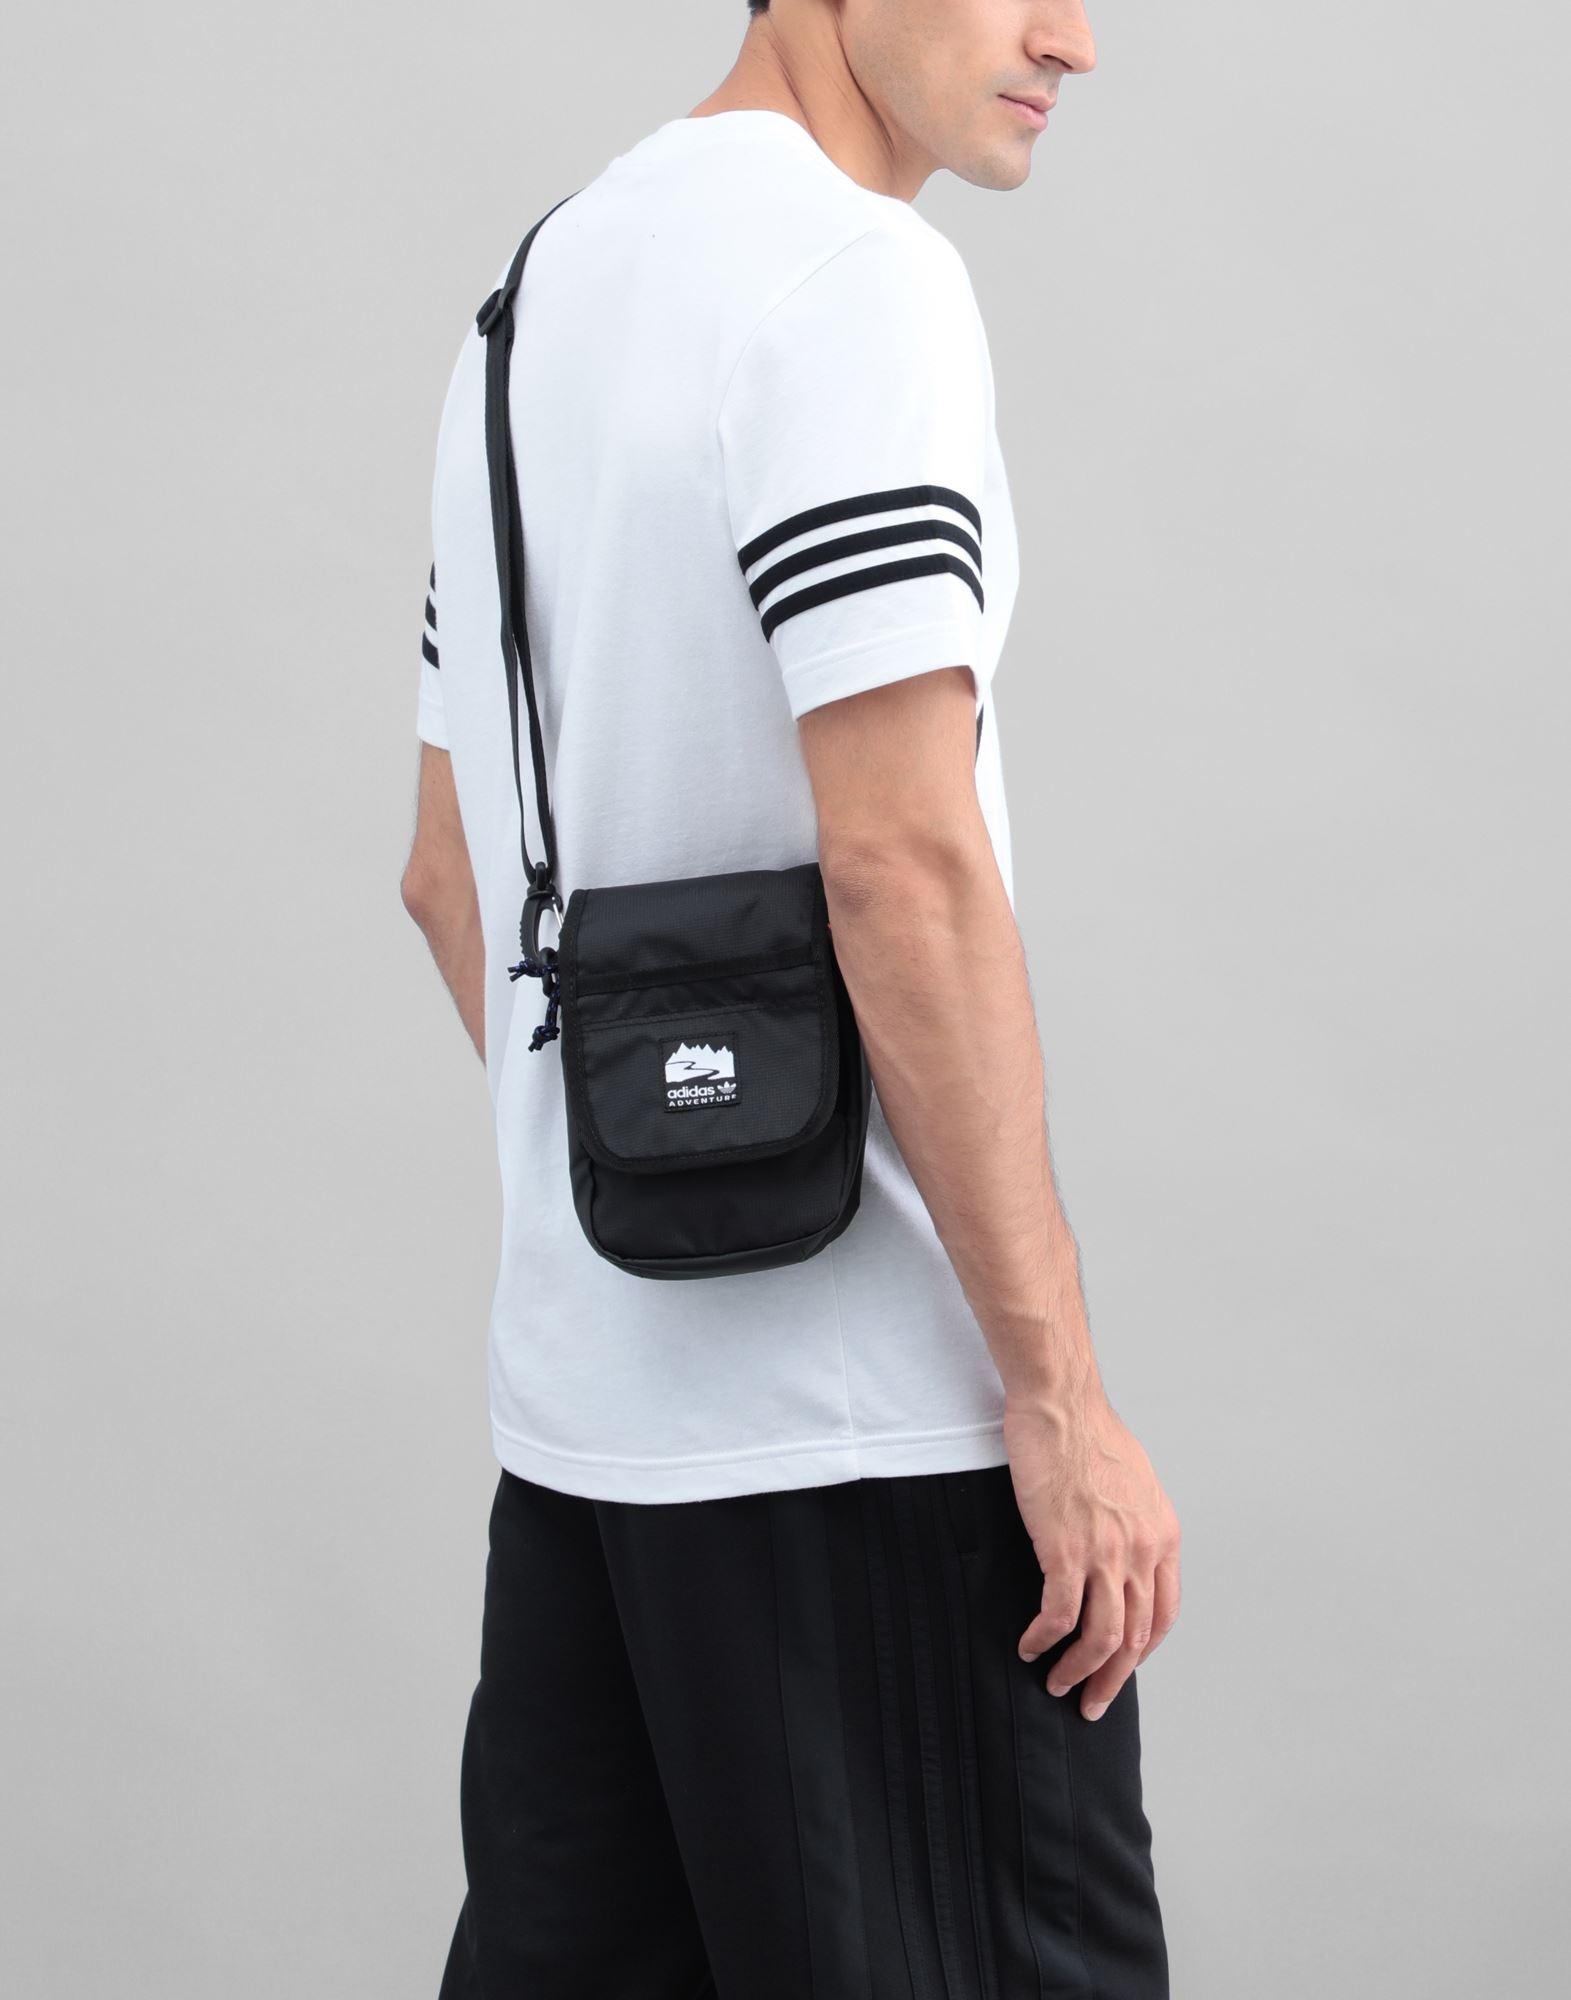 Details more than 93 adidas sling bags india latest - in.cdgdbentre